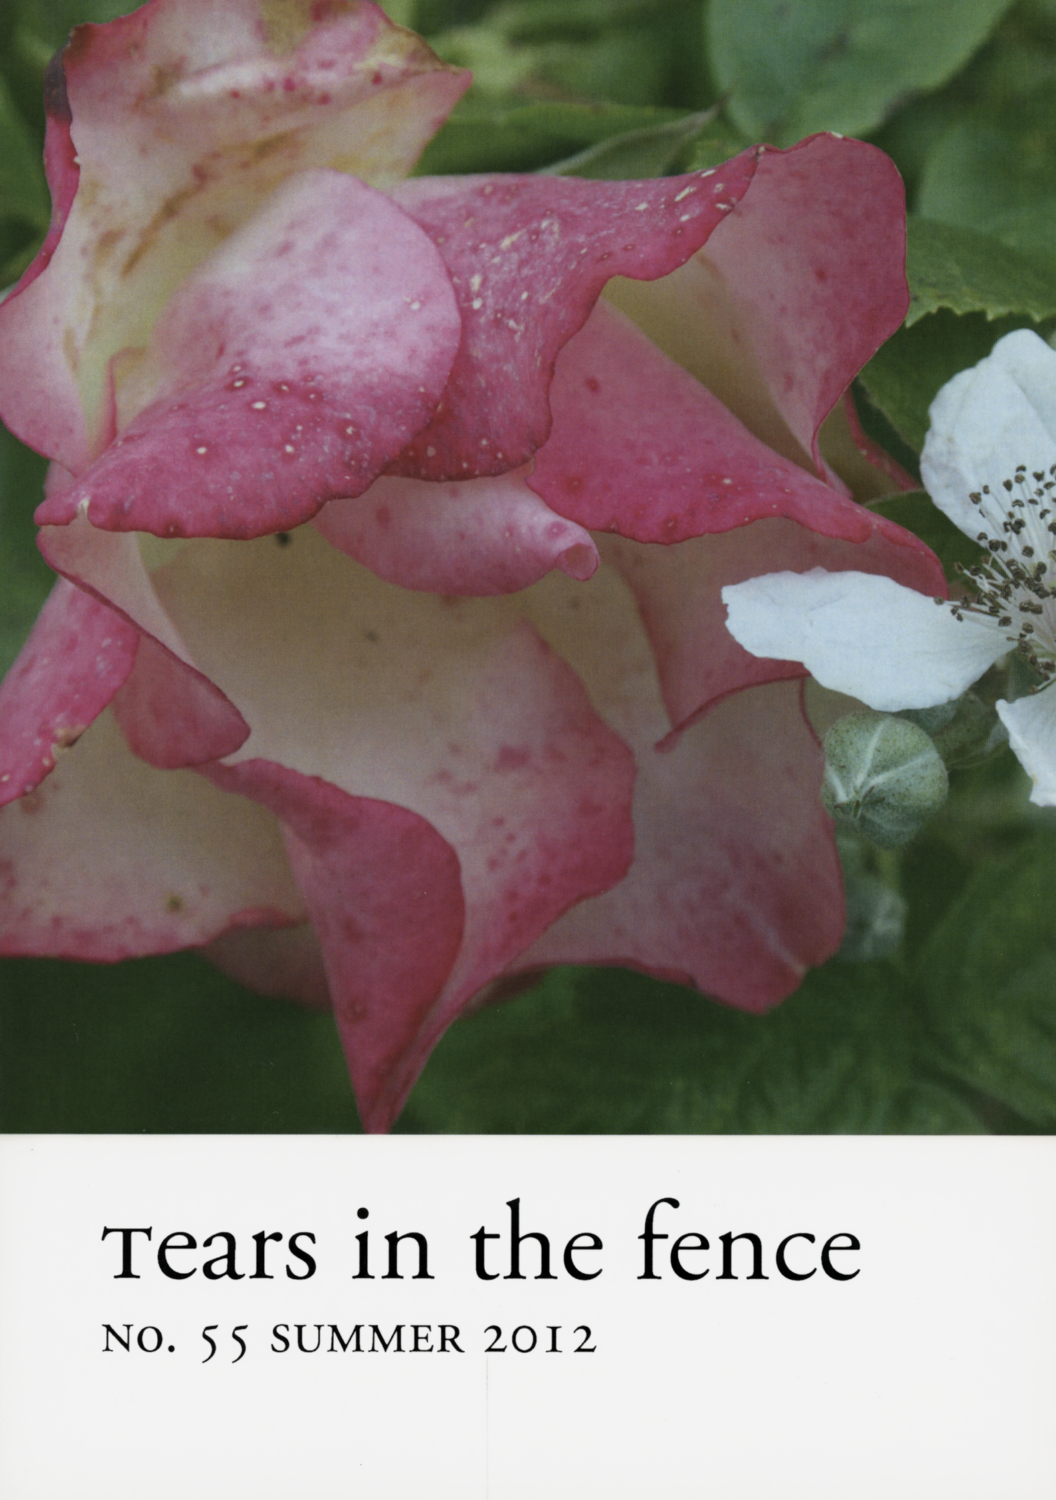 Tears in the fence, No 55 Summer 2012